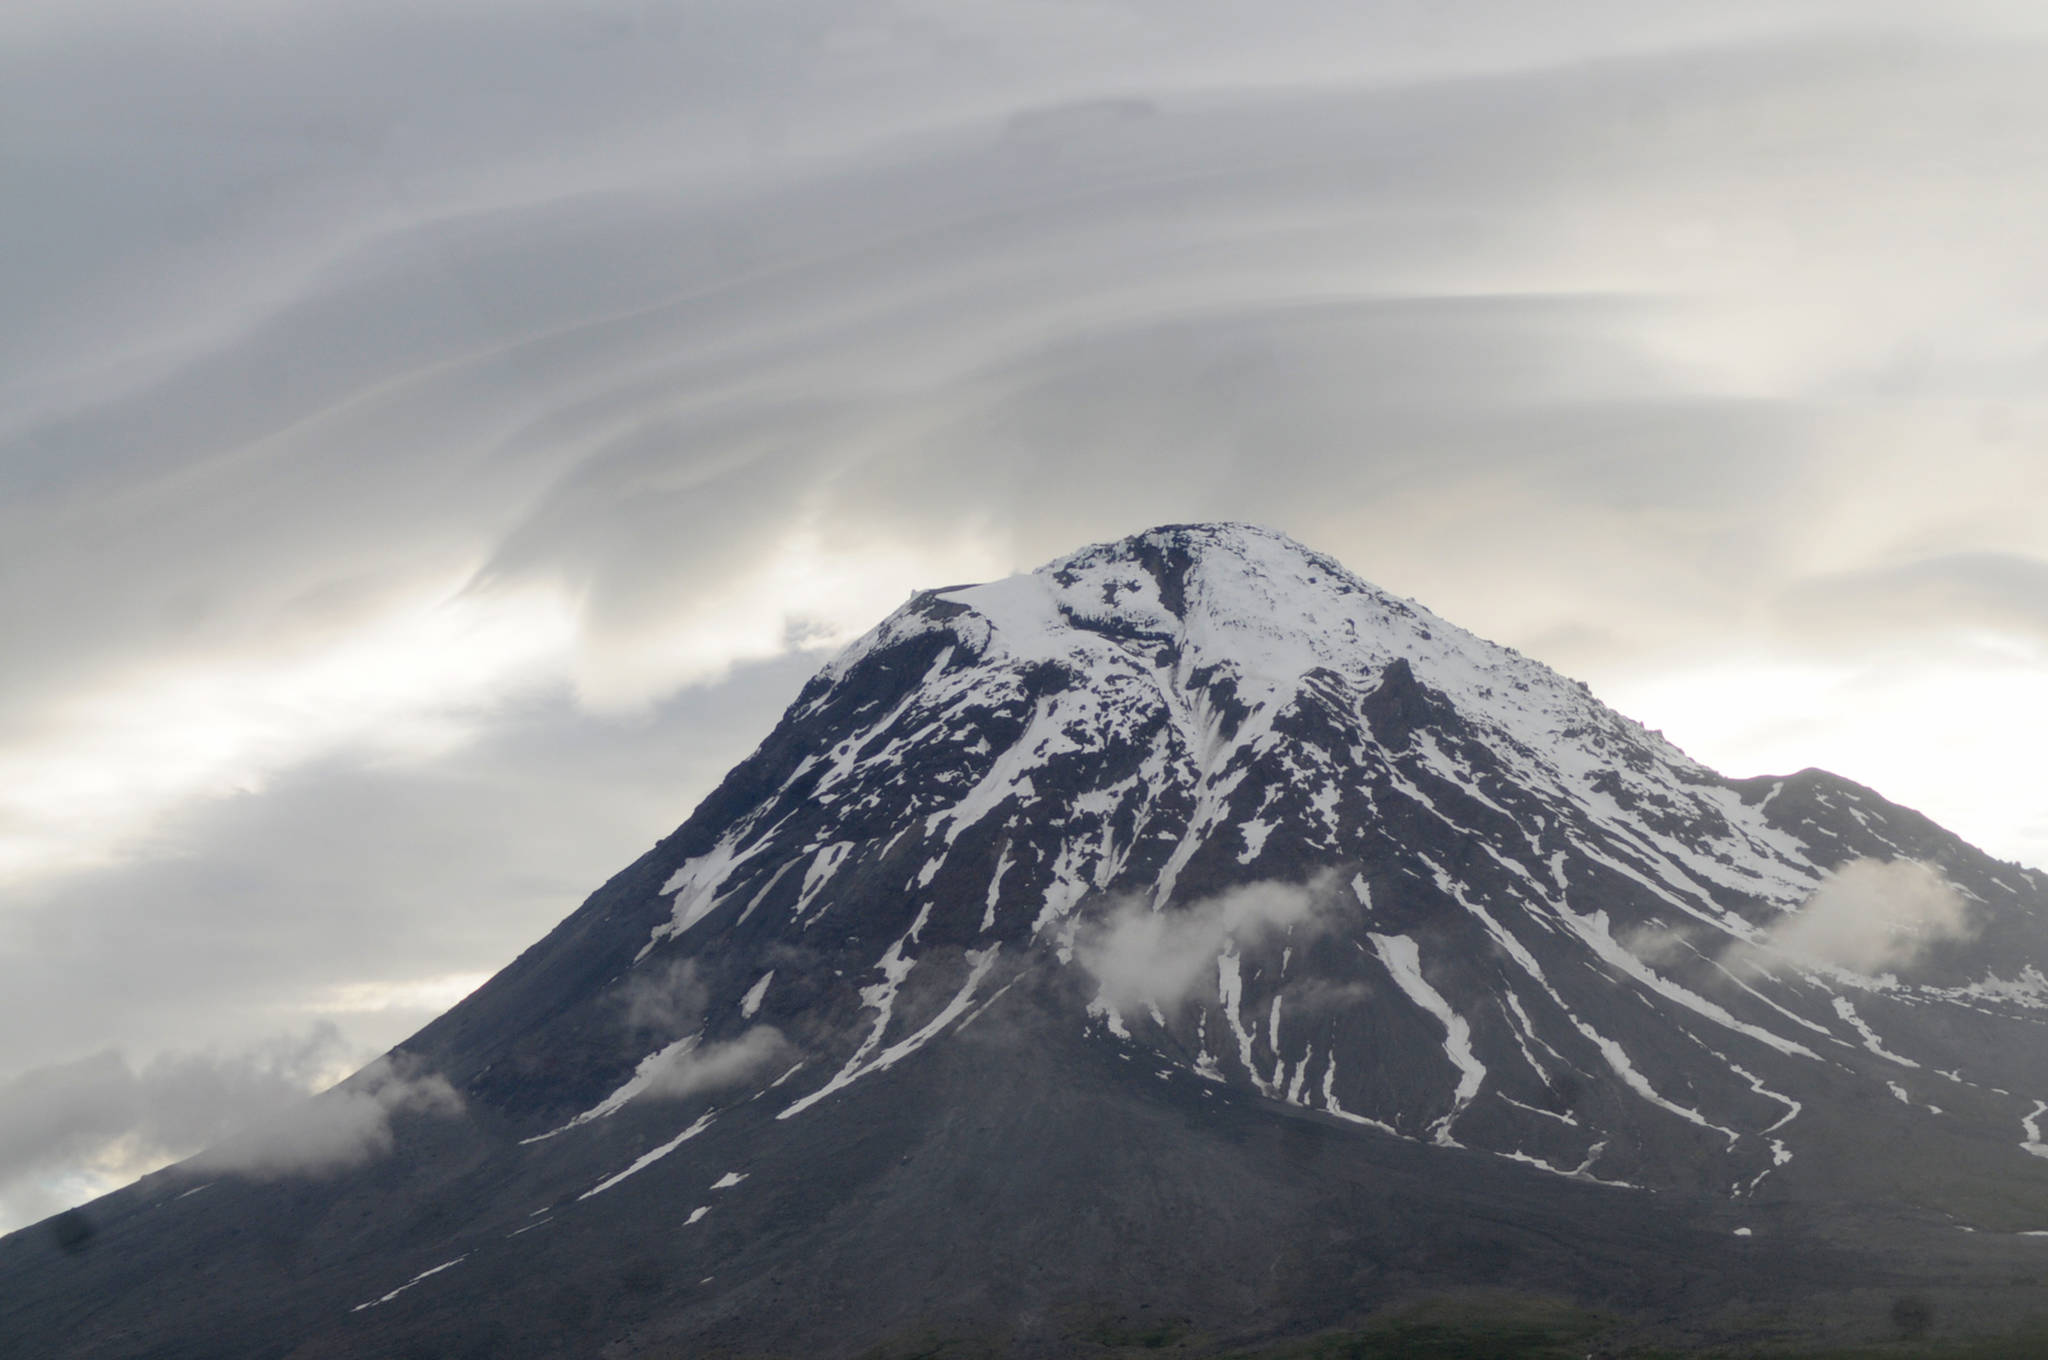 Clouds and smoke curl around the top of Augustine Volcano on Sunday, June 4, 2017 on Augustine Island, Alaska. The remote island in Cook Inlet is composed of little more than the volcano and its surrounding debris. (Elizabeth Earl/Peninsula Clarion, file)